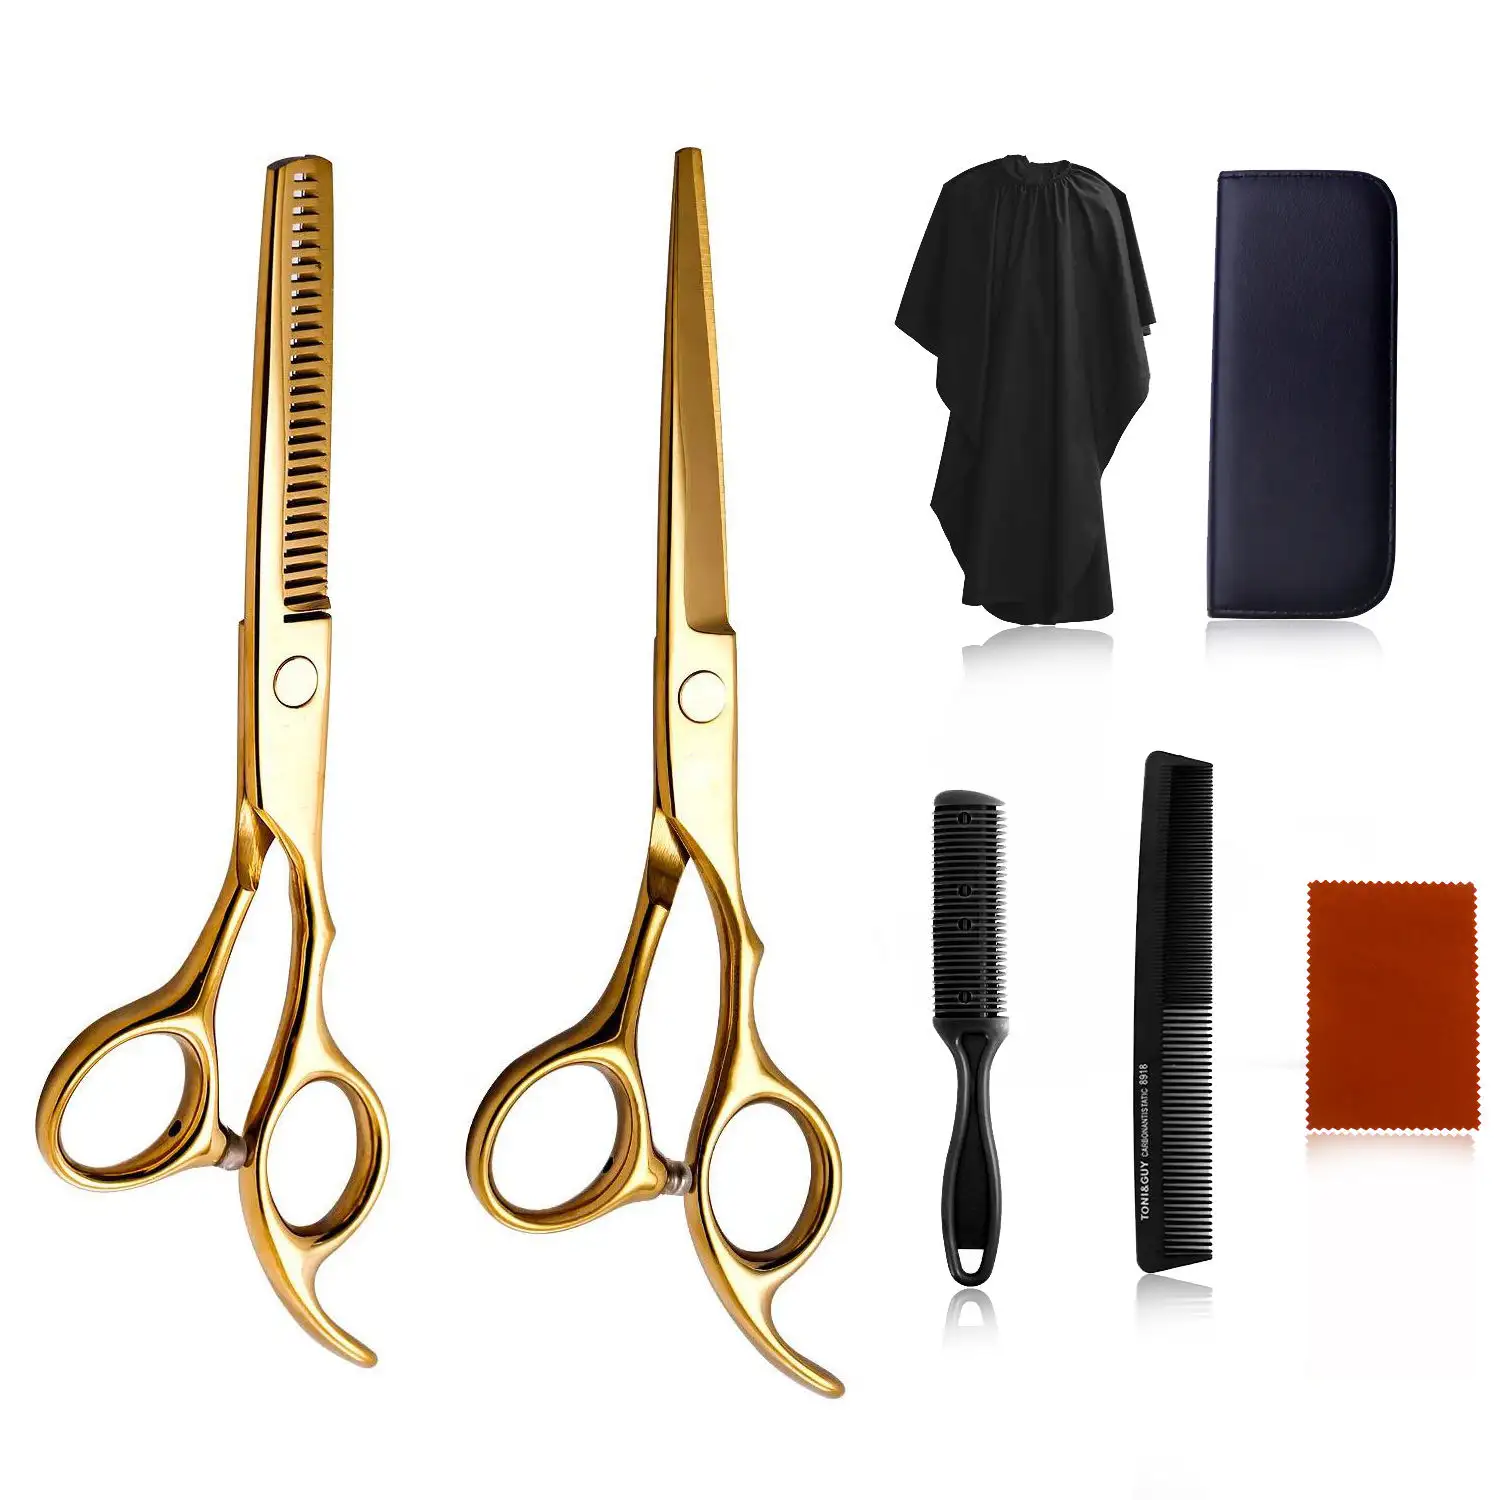 High Quality 11 Piece Stainless Steel Set For Hairdressing Left Hand Barber Professional Scissors